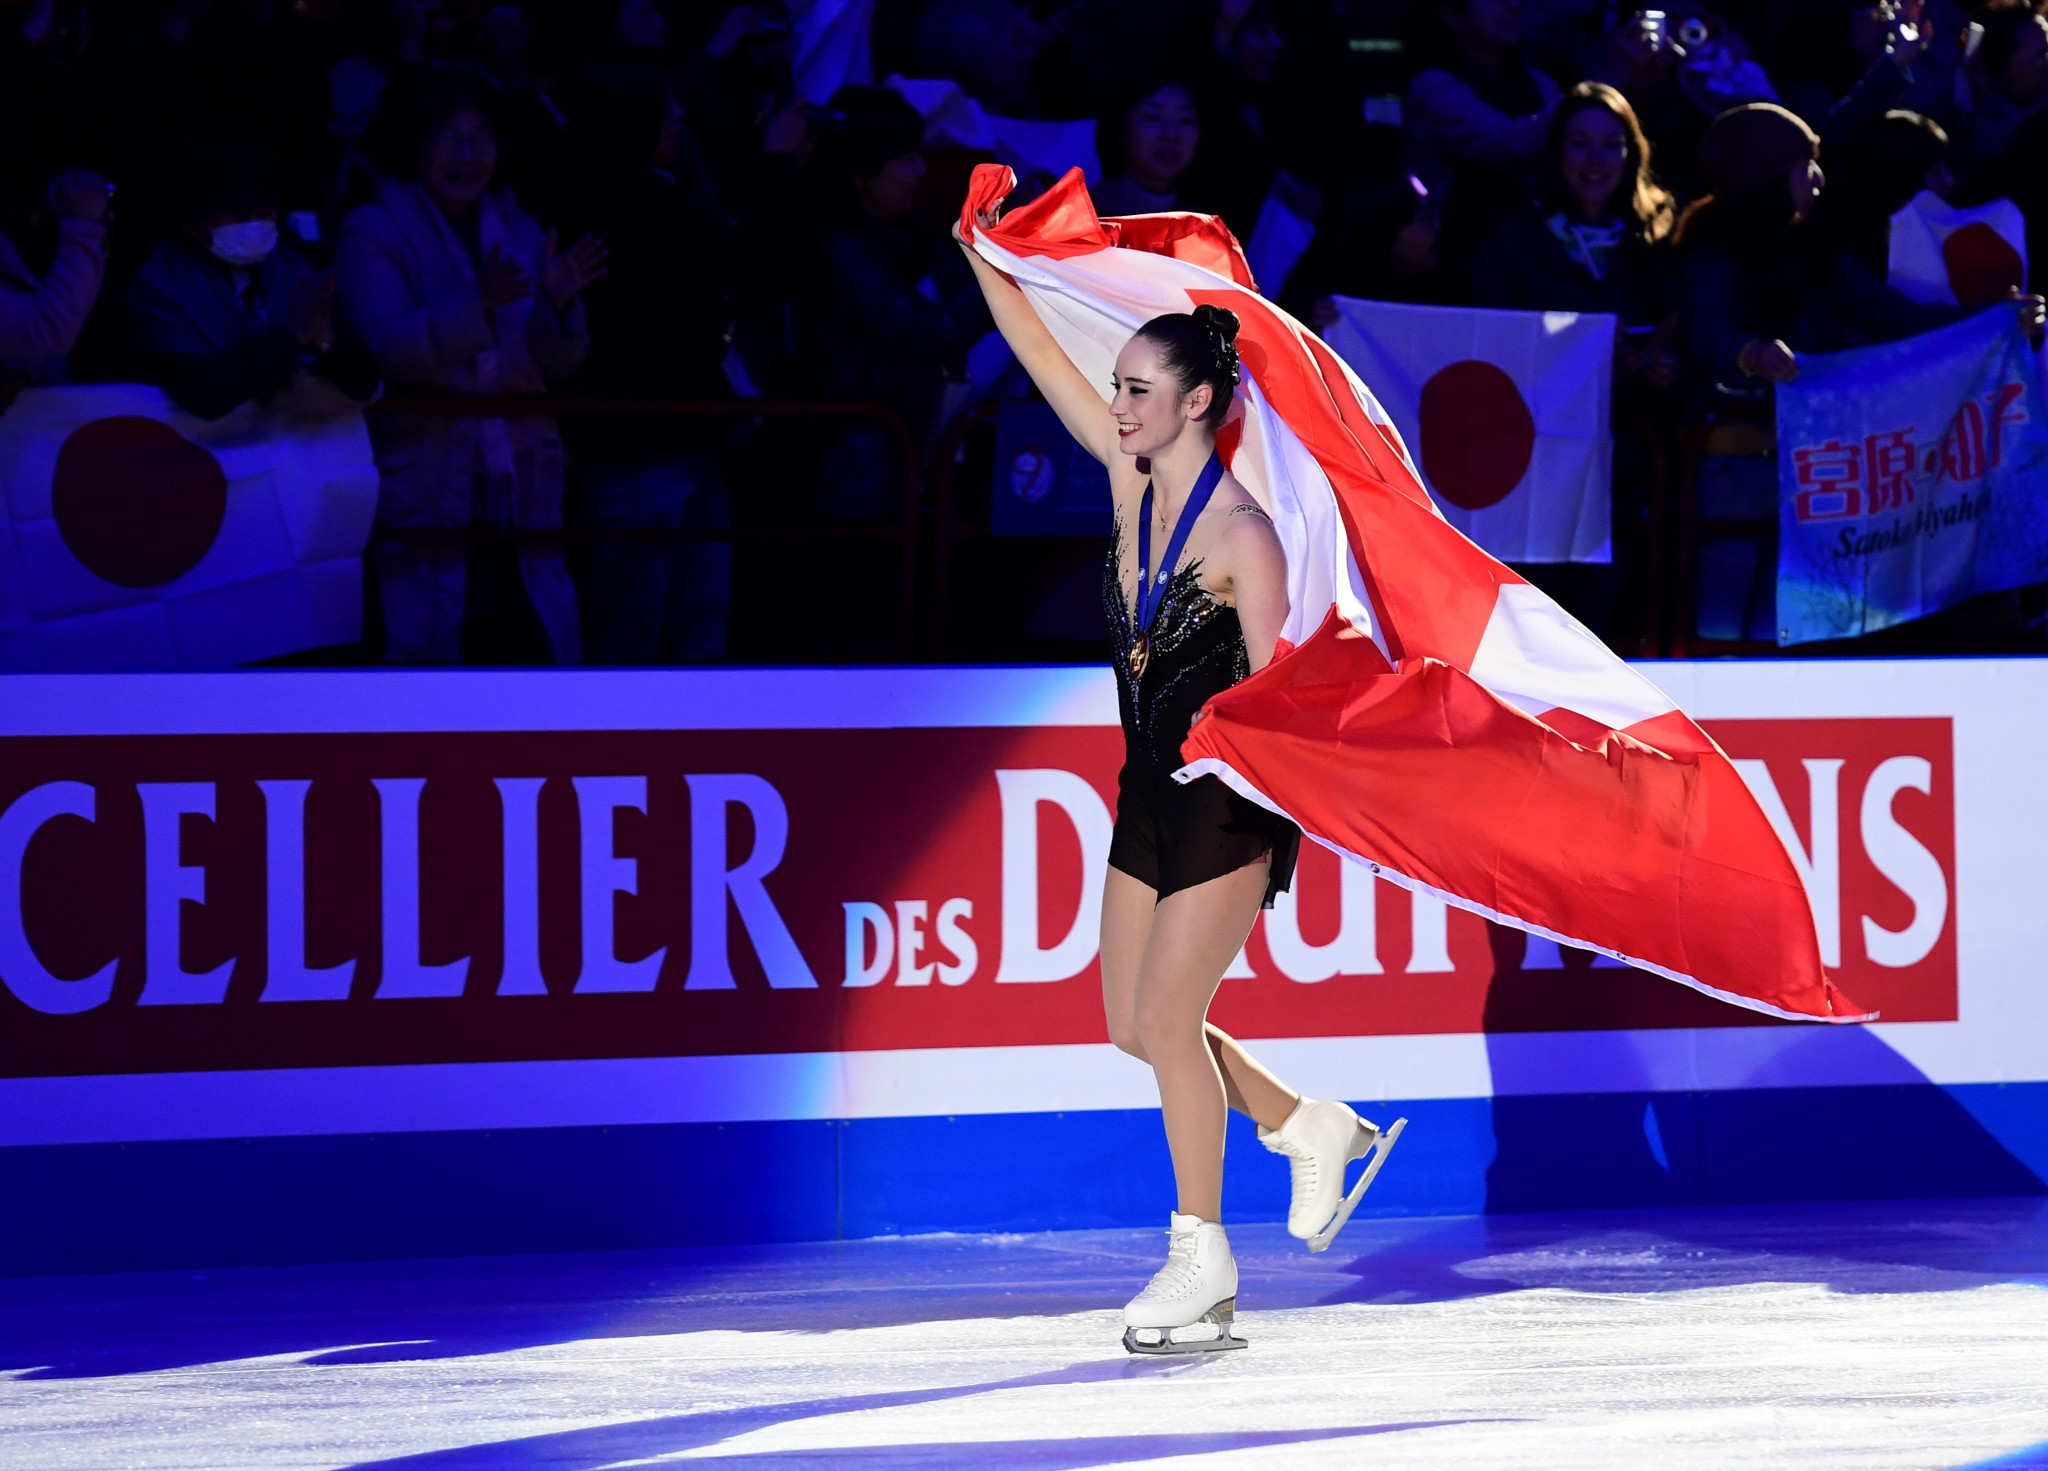 Kaetlyn Osmond won the world title in Milan this year  ©Getty Images